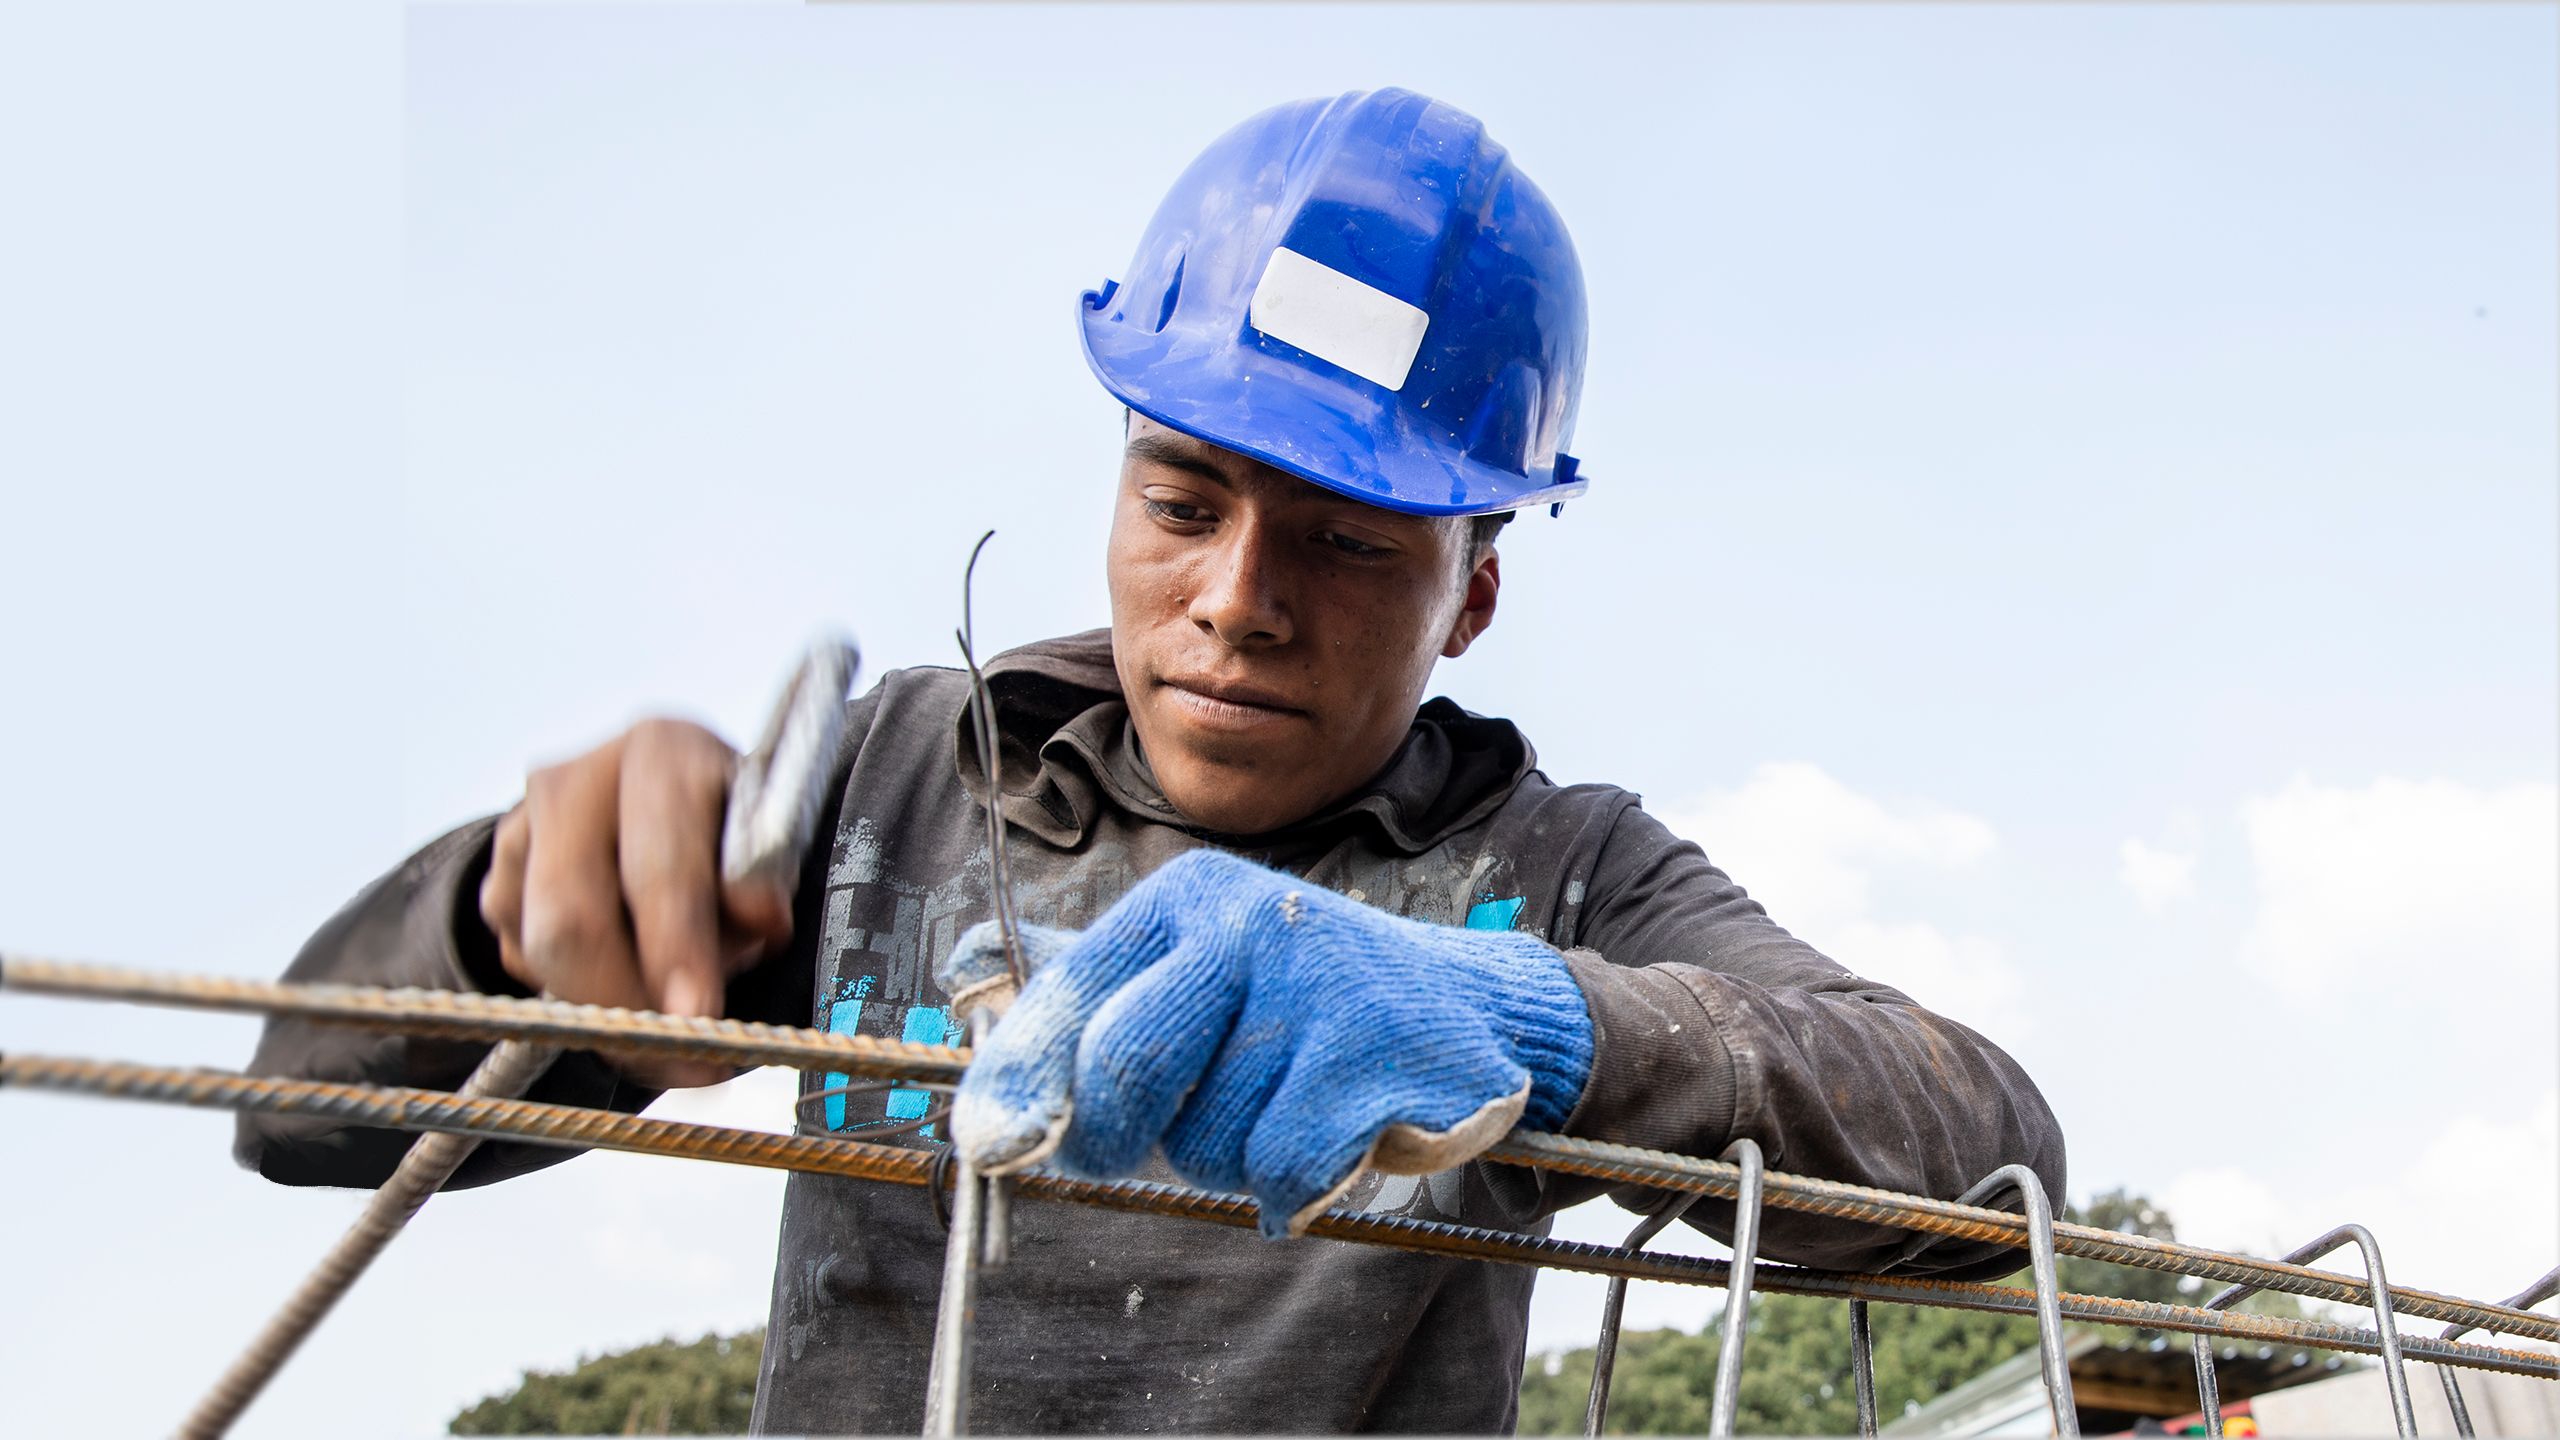 A volunteer adjusts wiring on a section of rebar.